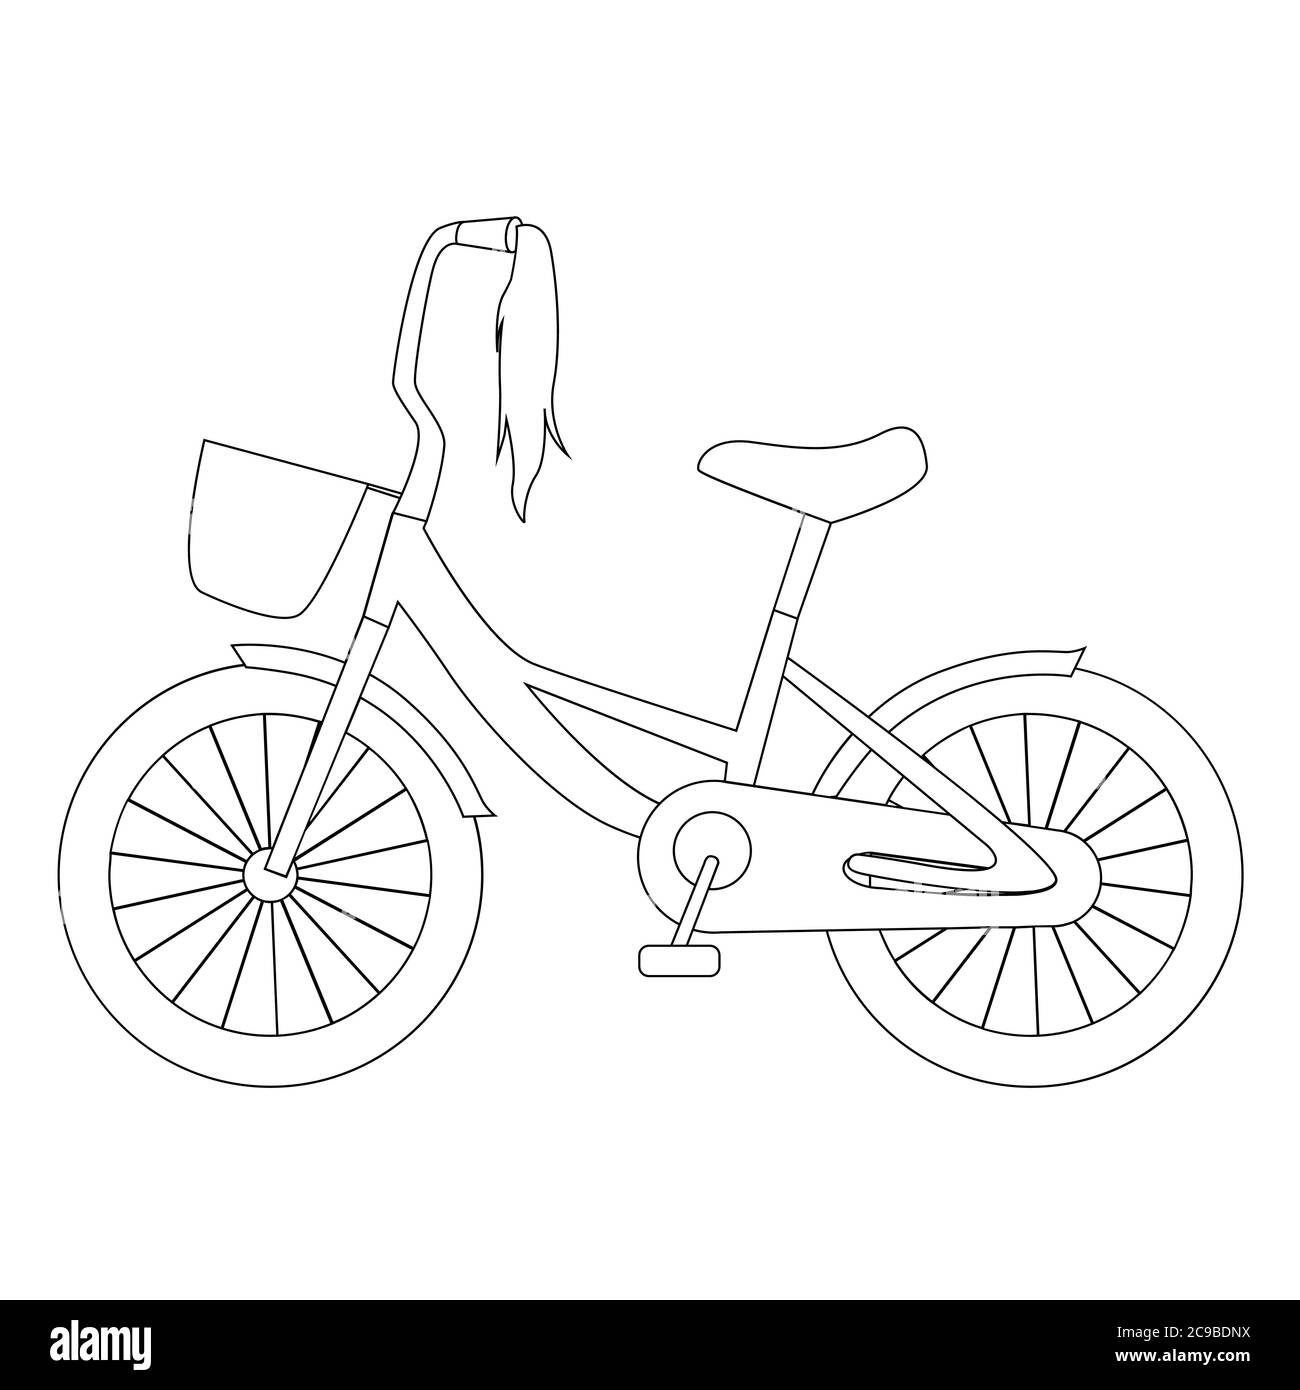 How to Draw a Kid on a Bike - Easy Drawing Art